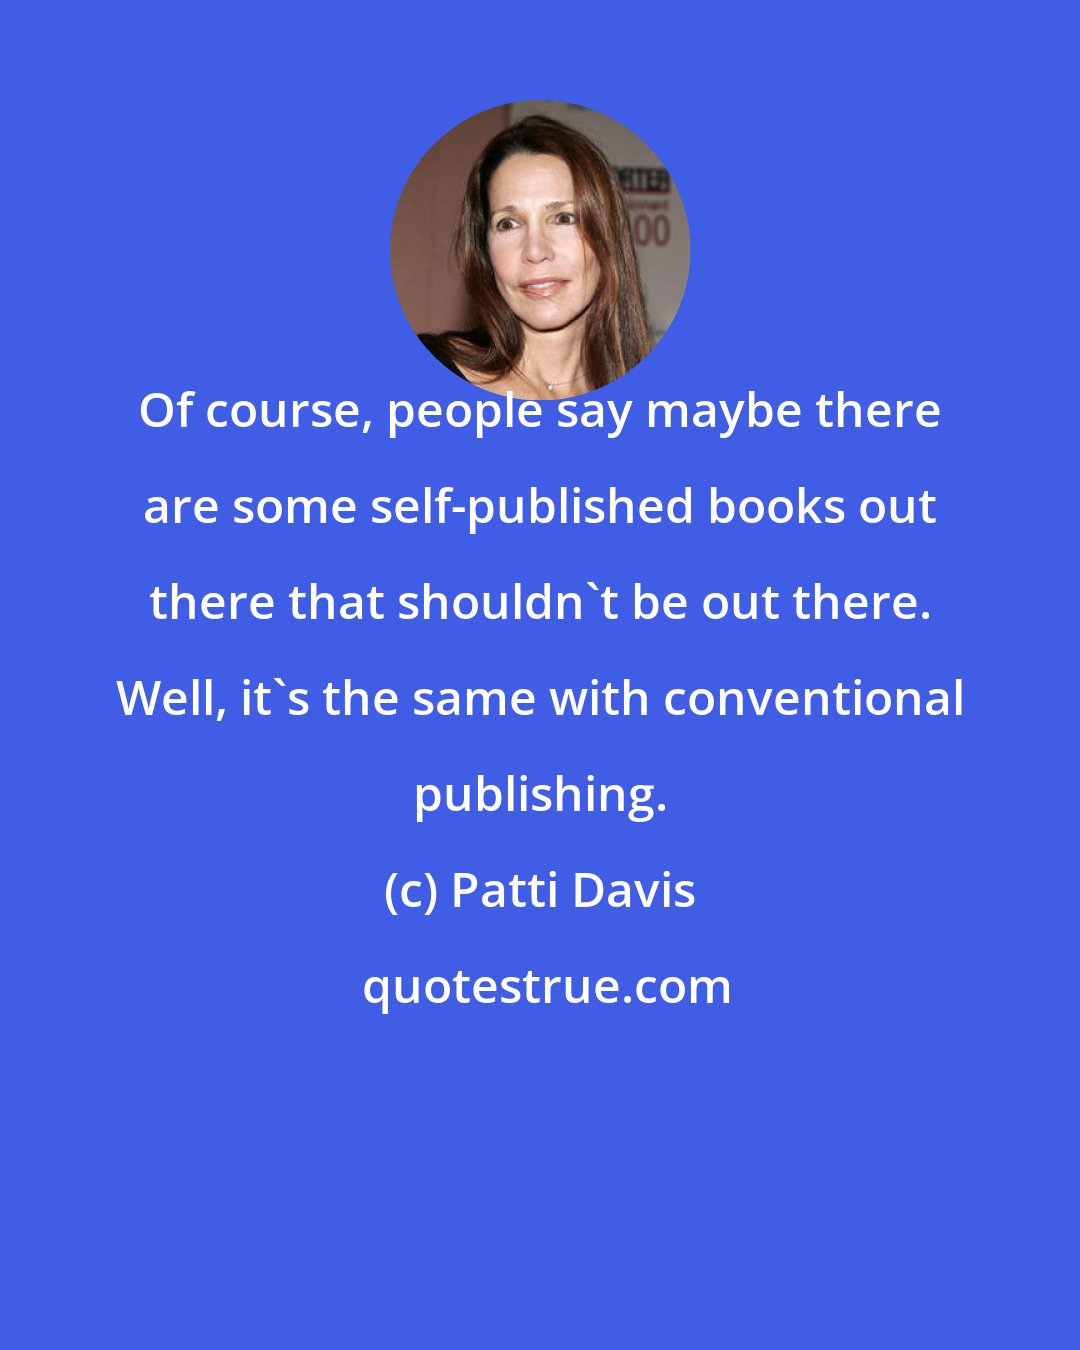 Patti Davis: Of course, people say maybe there are some self-published books out there that shouldn't be out there. Well, it's the same with conventional publishing.